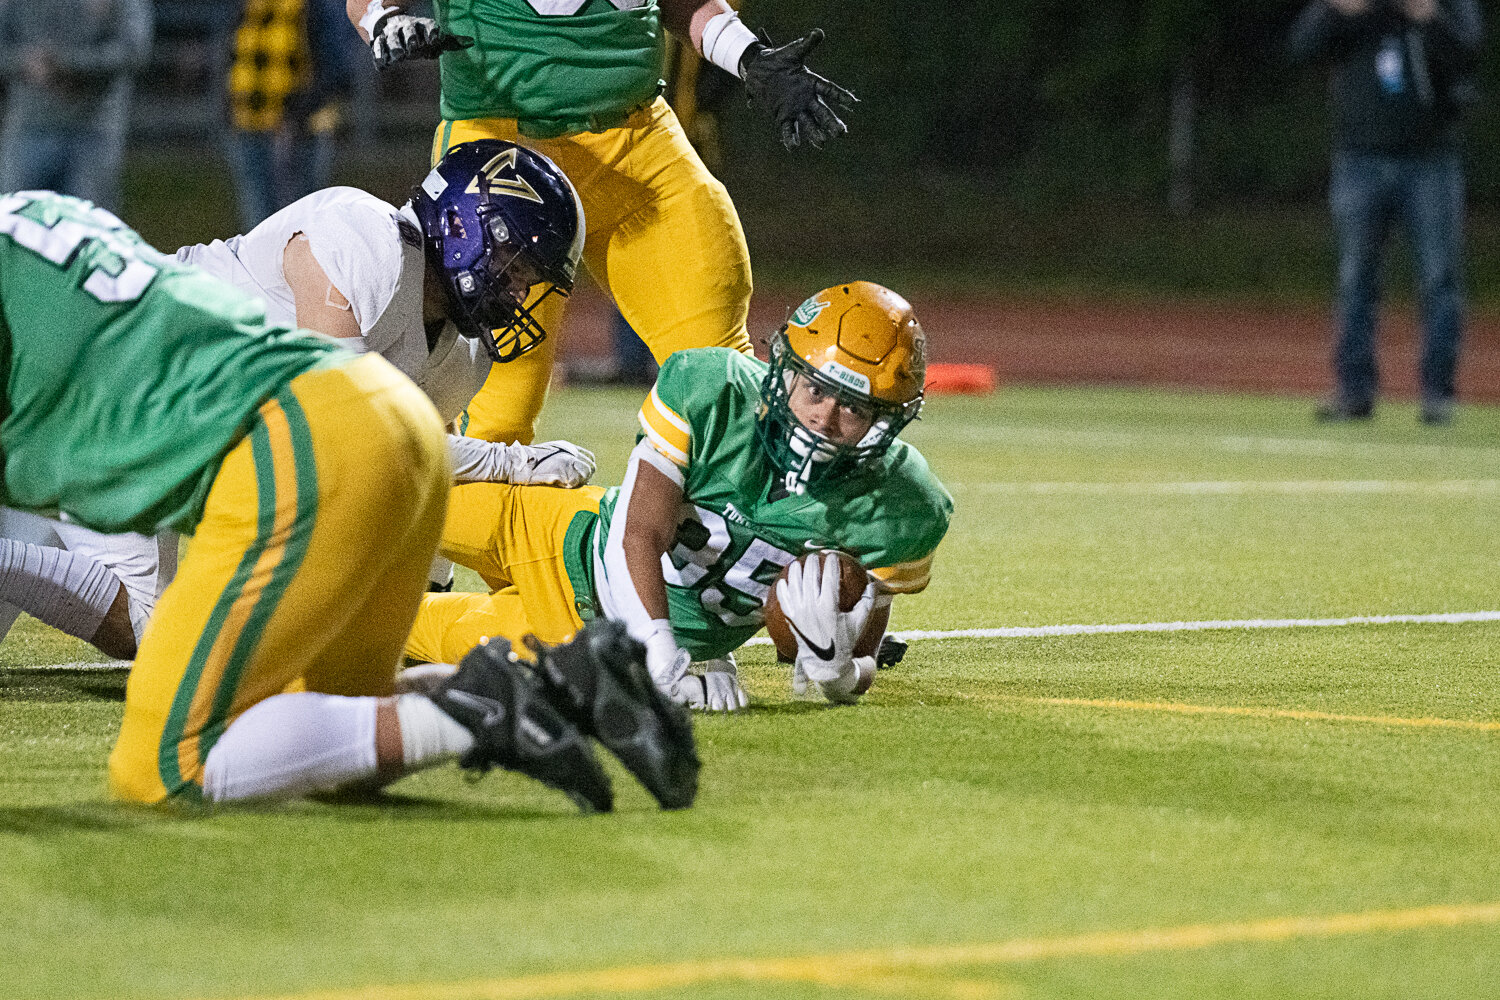 Kooper Clark dives over the goal line for his first touchdown of the night in Tumwater's 19-17 win over North Kitsap in the 2A state semifinals on Nov. 25.